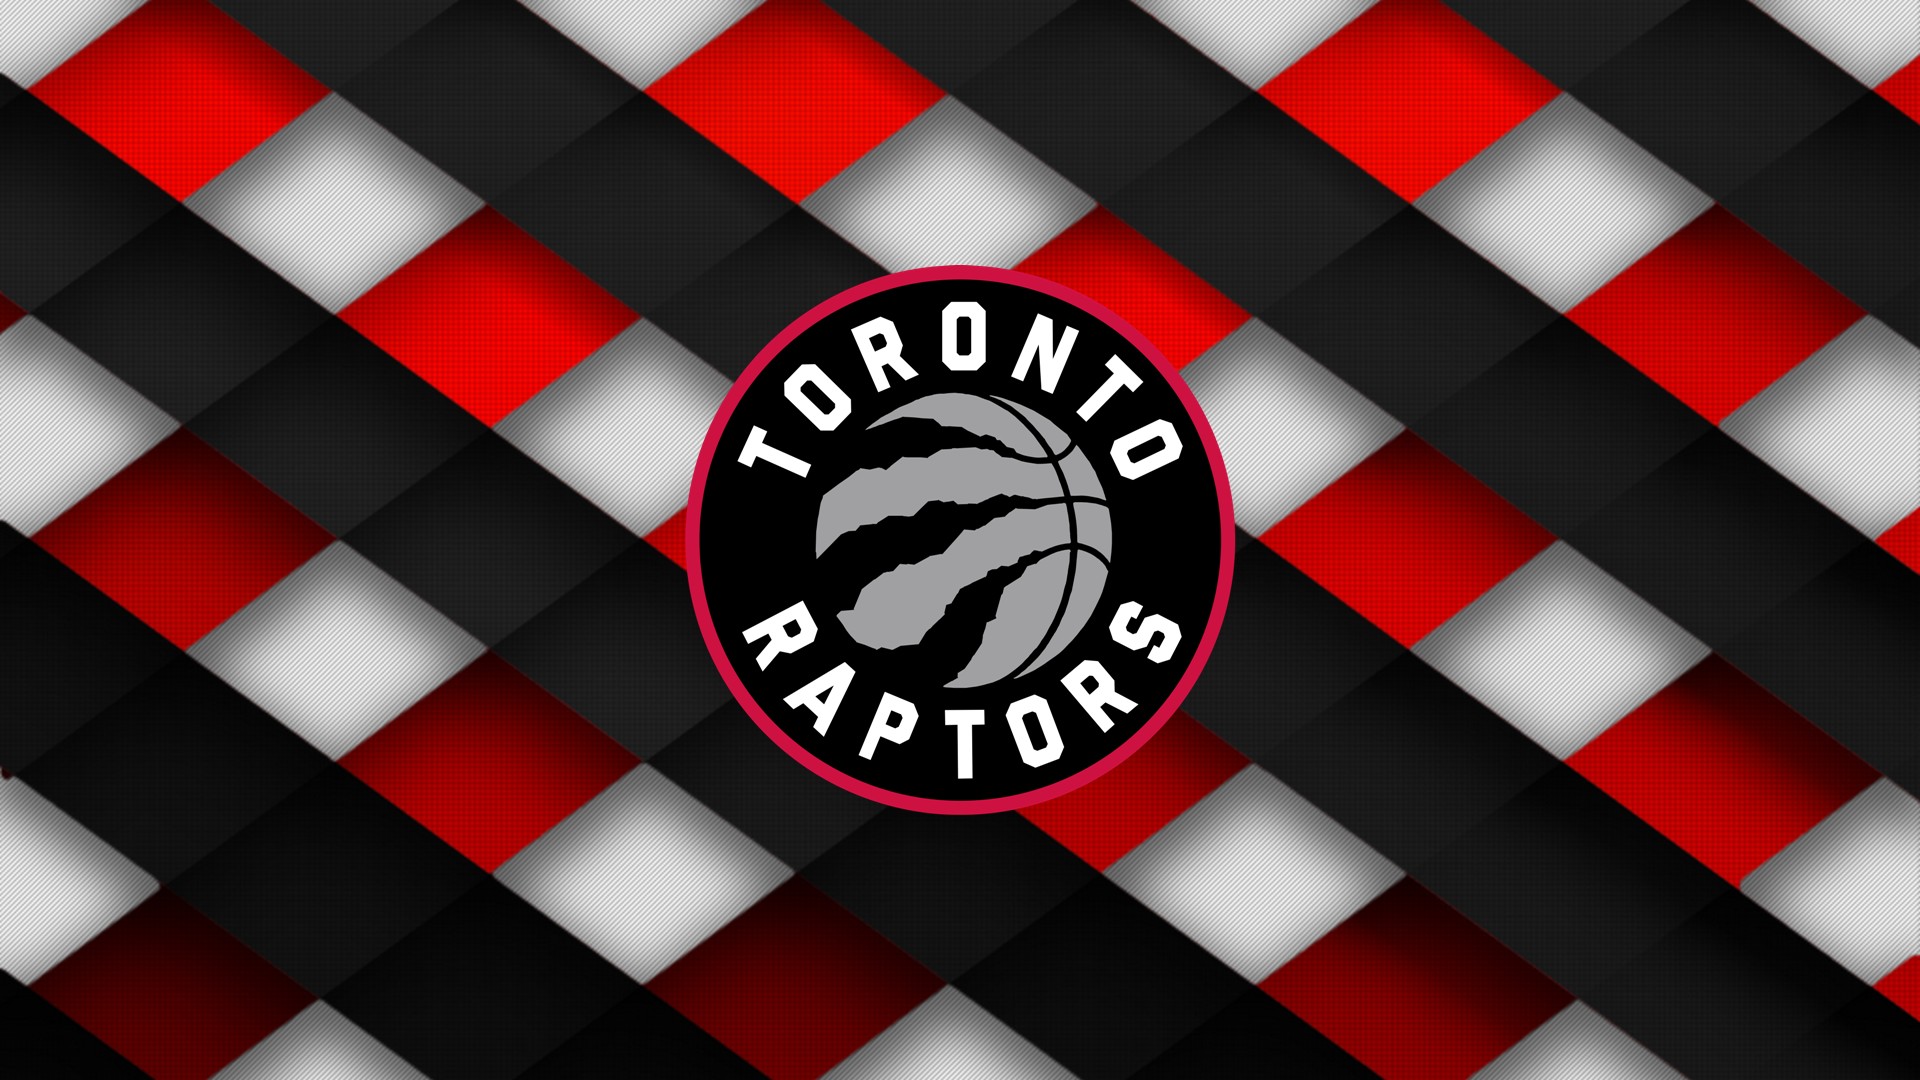 Raptors Basketball HD Wallpapers with image dimensions 1920x1080 pixel. You can make this wallpaper for your Desktop Computer Backgrounds, Windows or Mac Screensavers, iPhone Lock screen, Tablet or Android and another Mobile Phone device